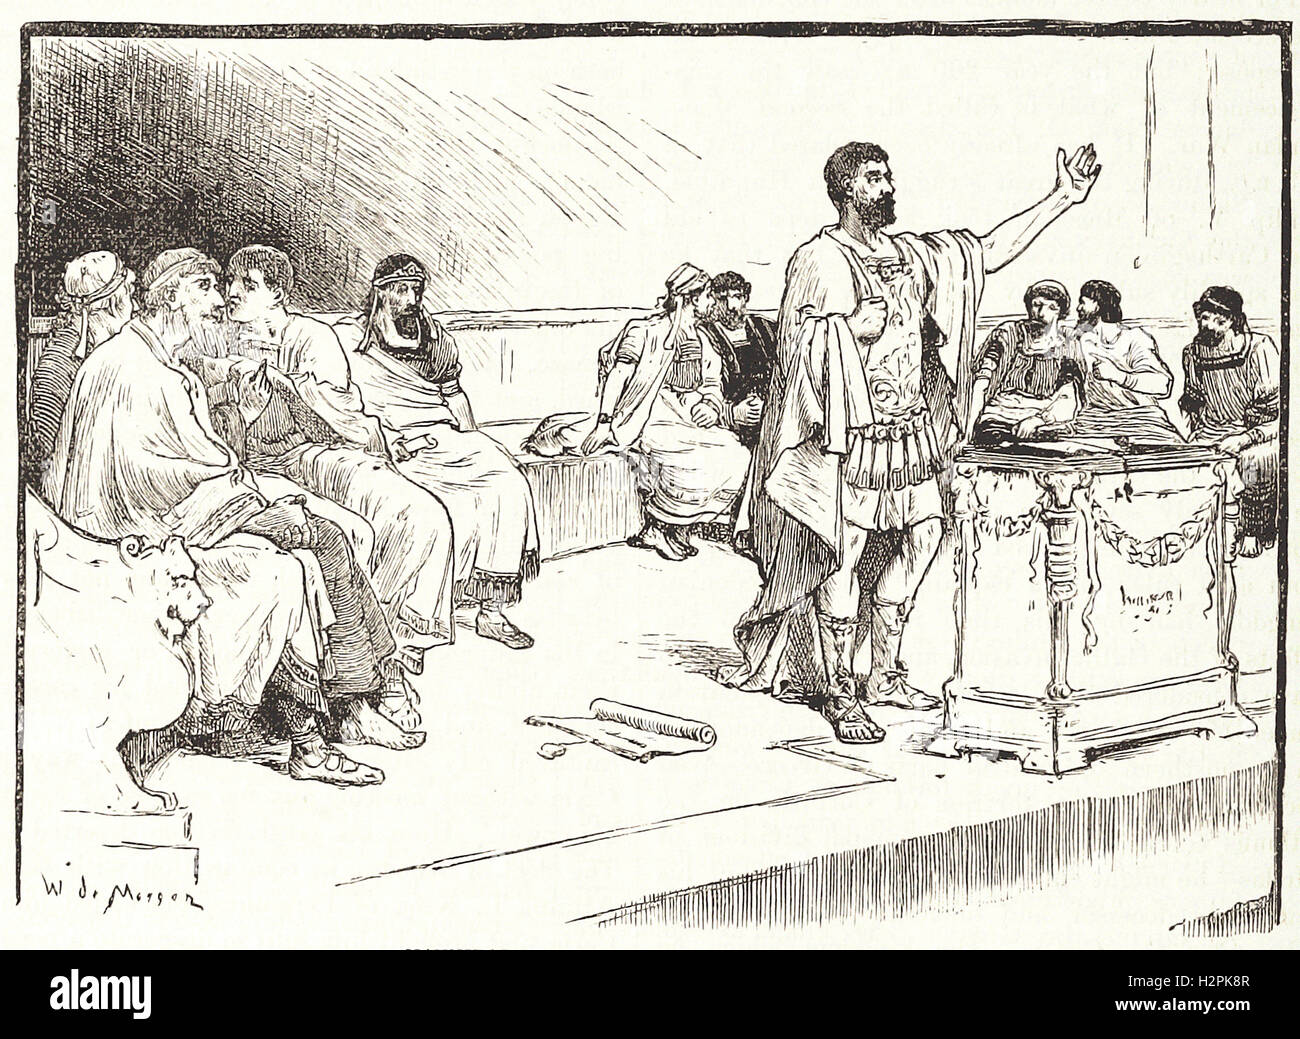 HANNIBAL IN THE ASSEMBLY AT CARTHAGE. - from 'Cassell's Illustrated Universal History' - 1882 Stock Photo